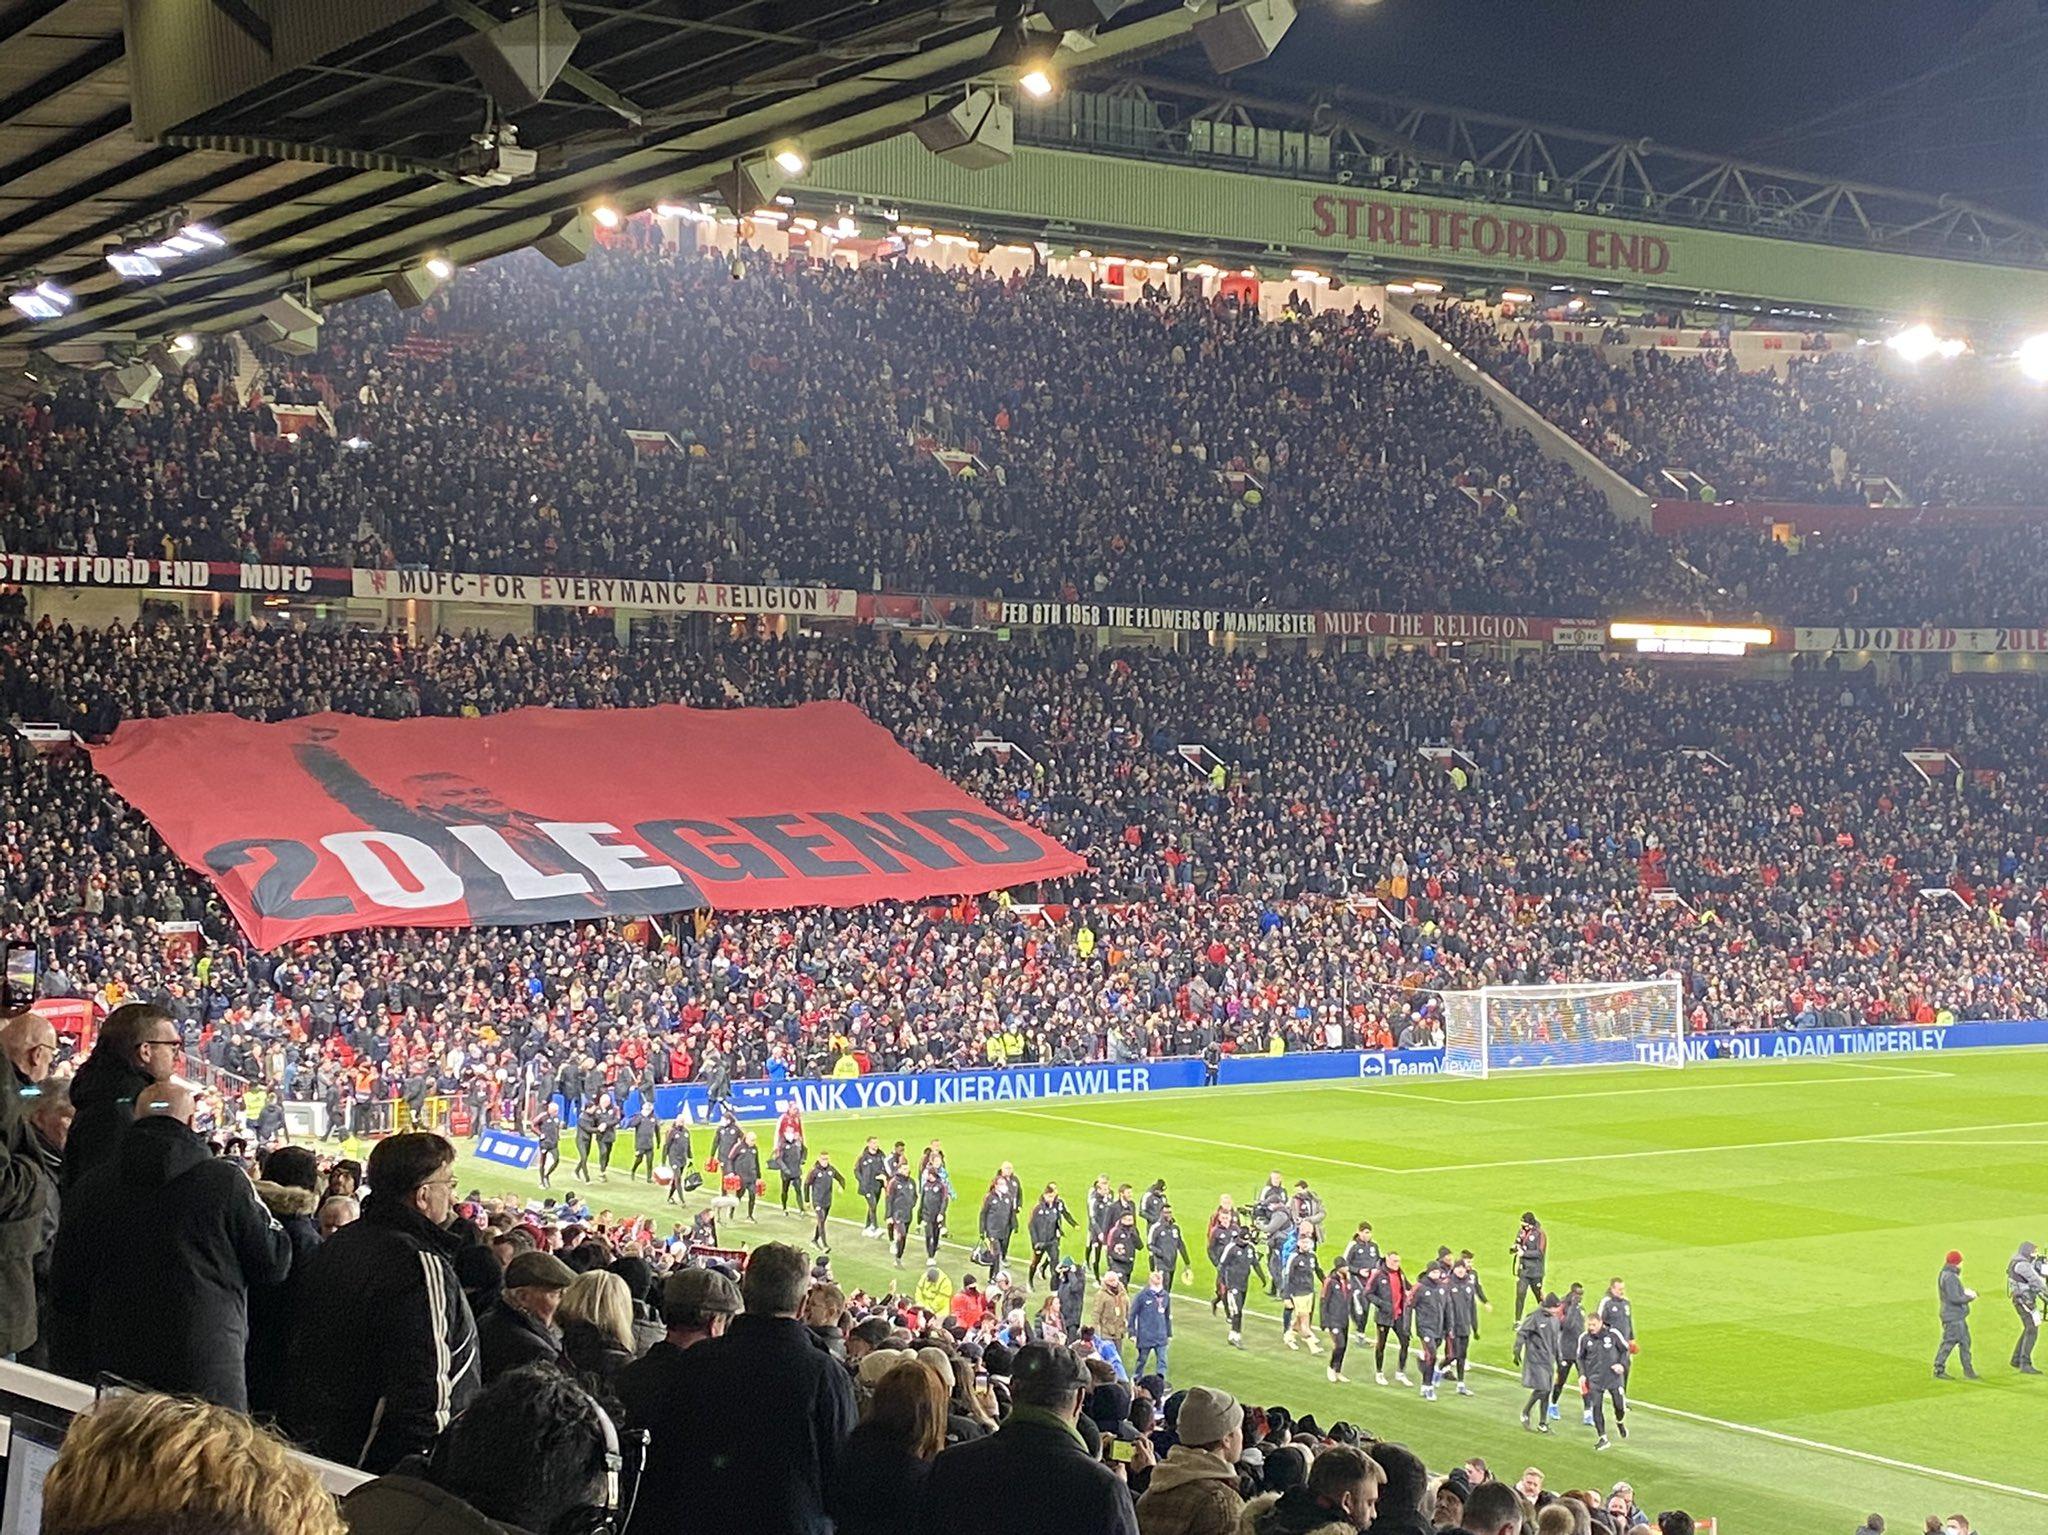 United Journal On The Stretford End Showing Their Love